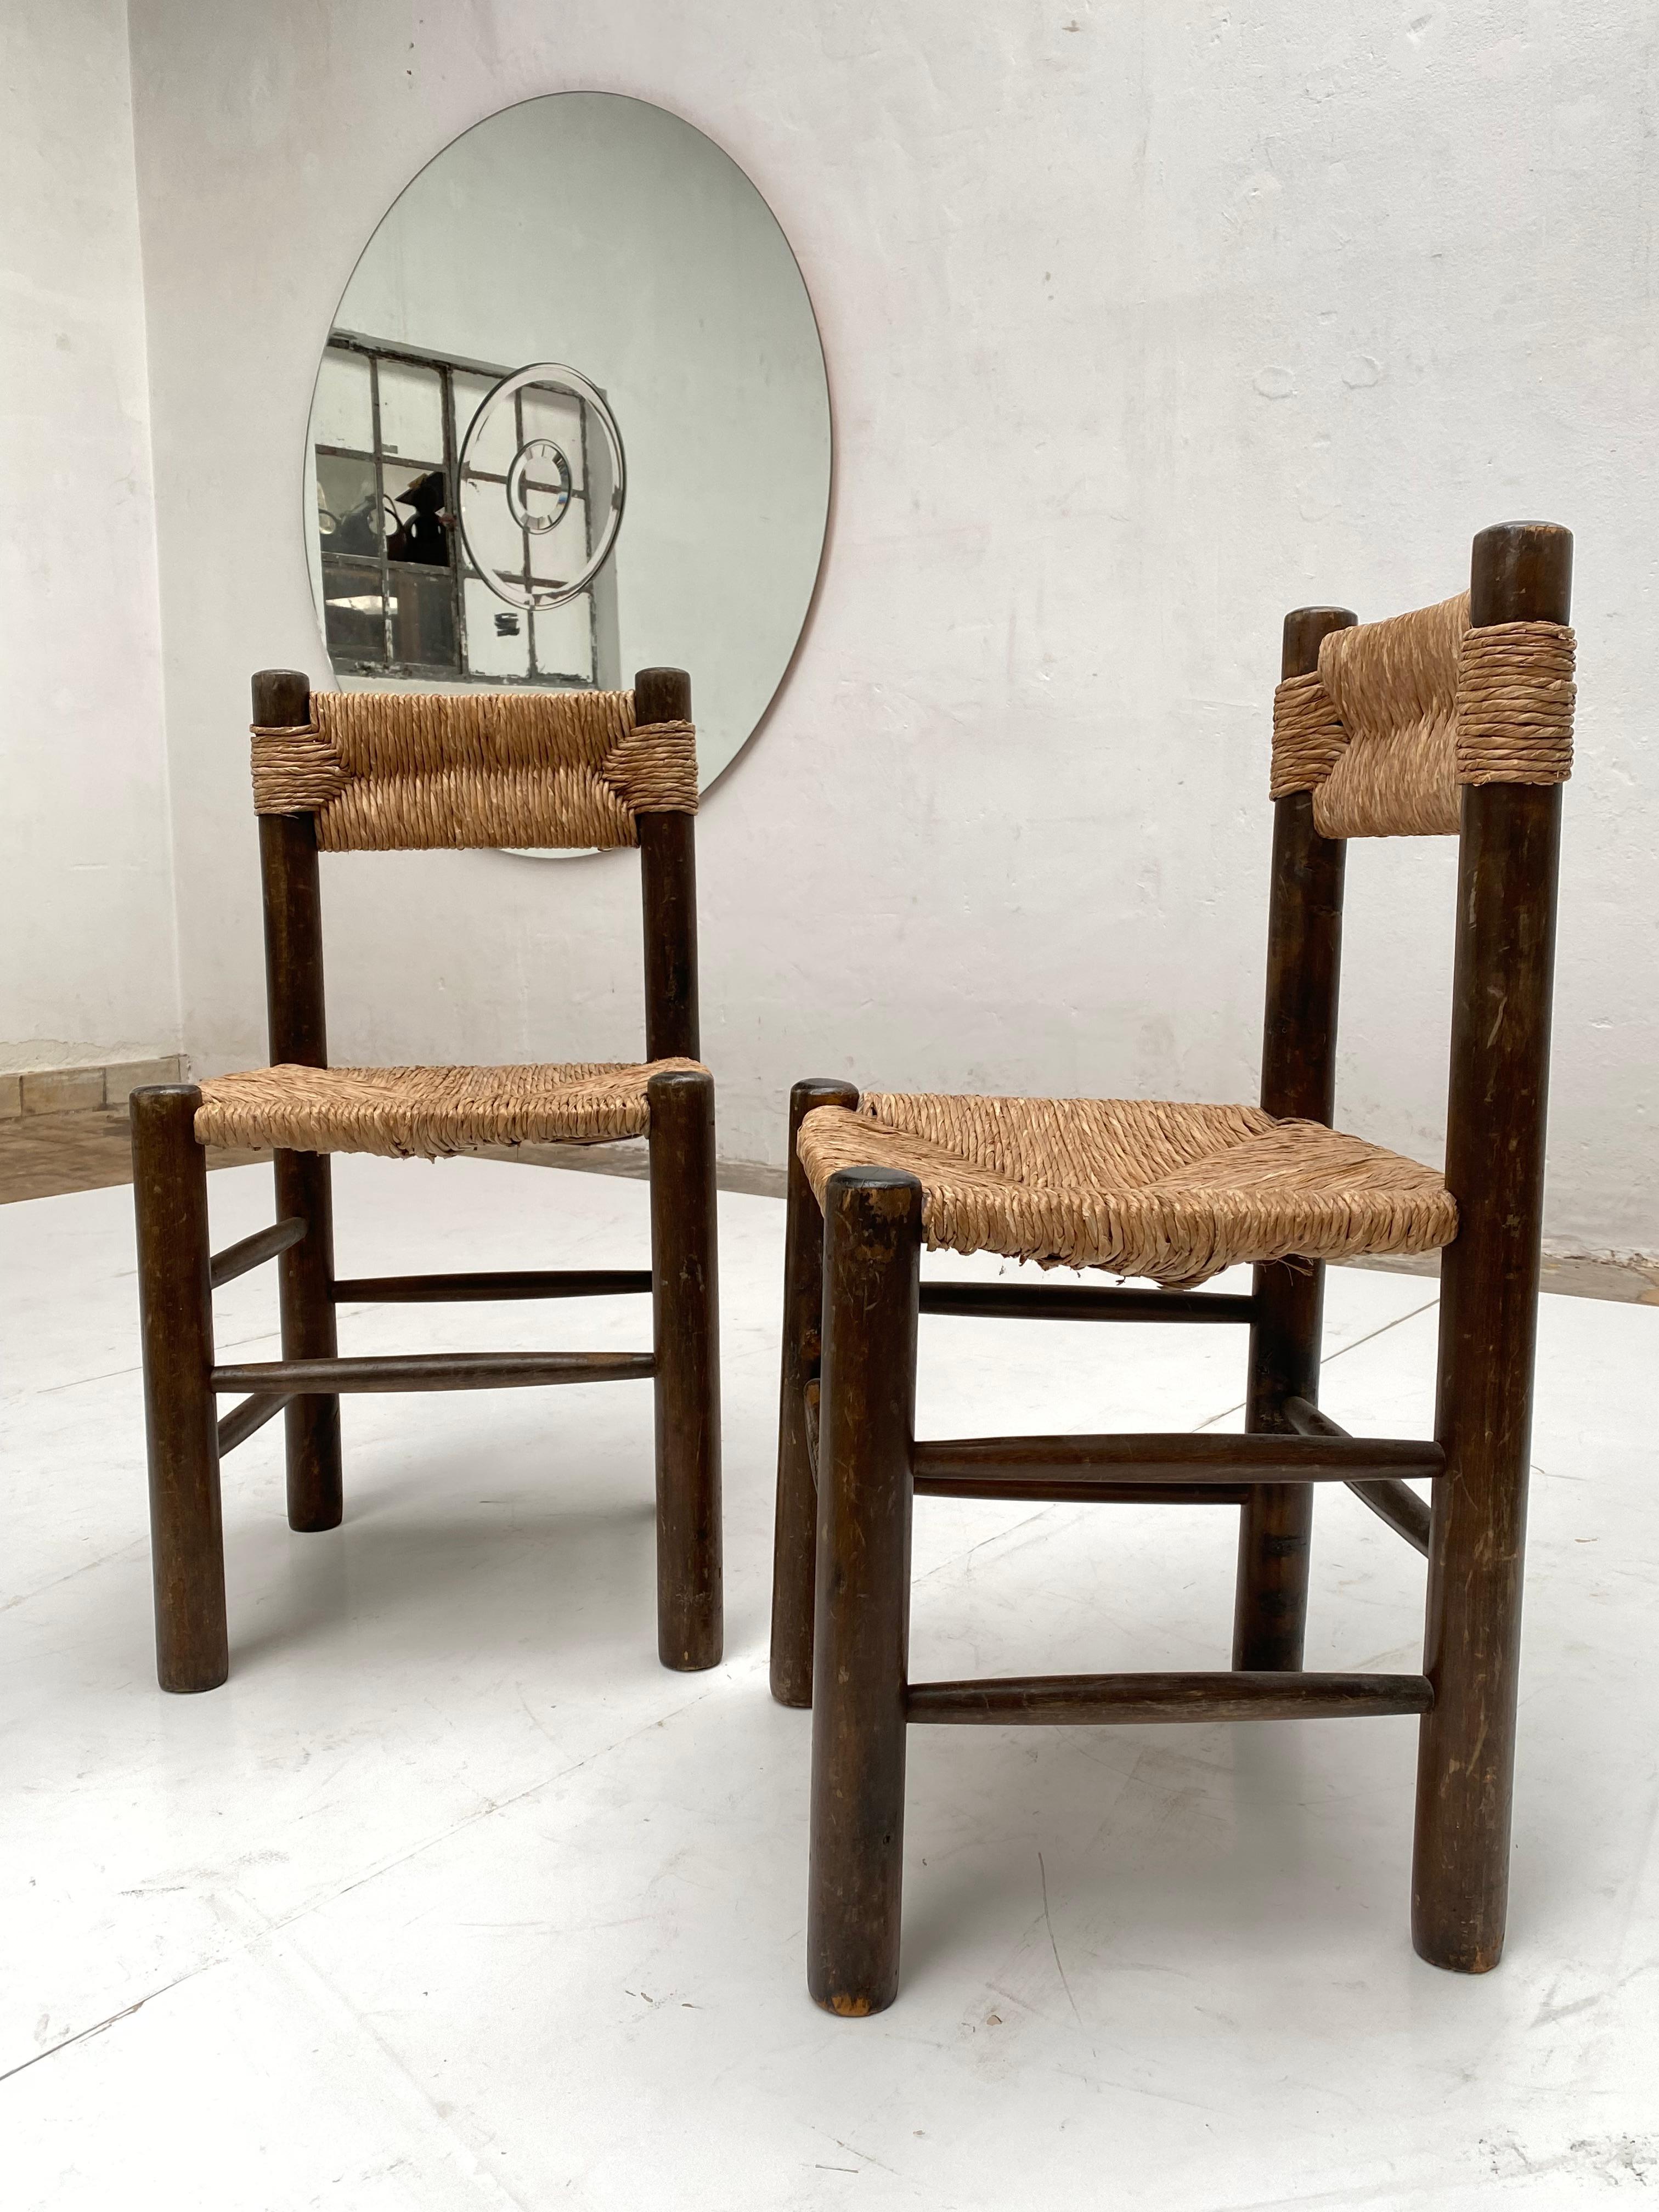 Pair of 'Dordogne' dining chairs in stained ash wood and hand-woven straw in a lovely as found untouched original vintage condition.

The Origin of Sentou?

The history of the Sentou firm goes back to the aftermath of the Second World War, when,